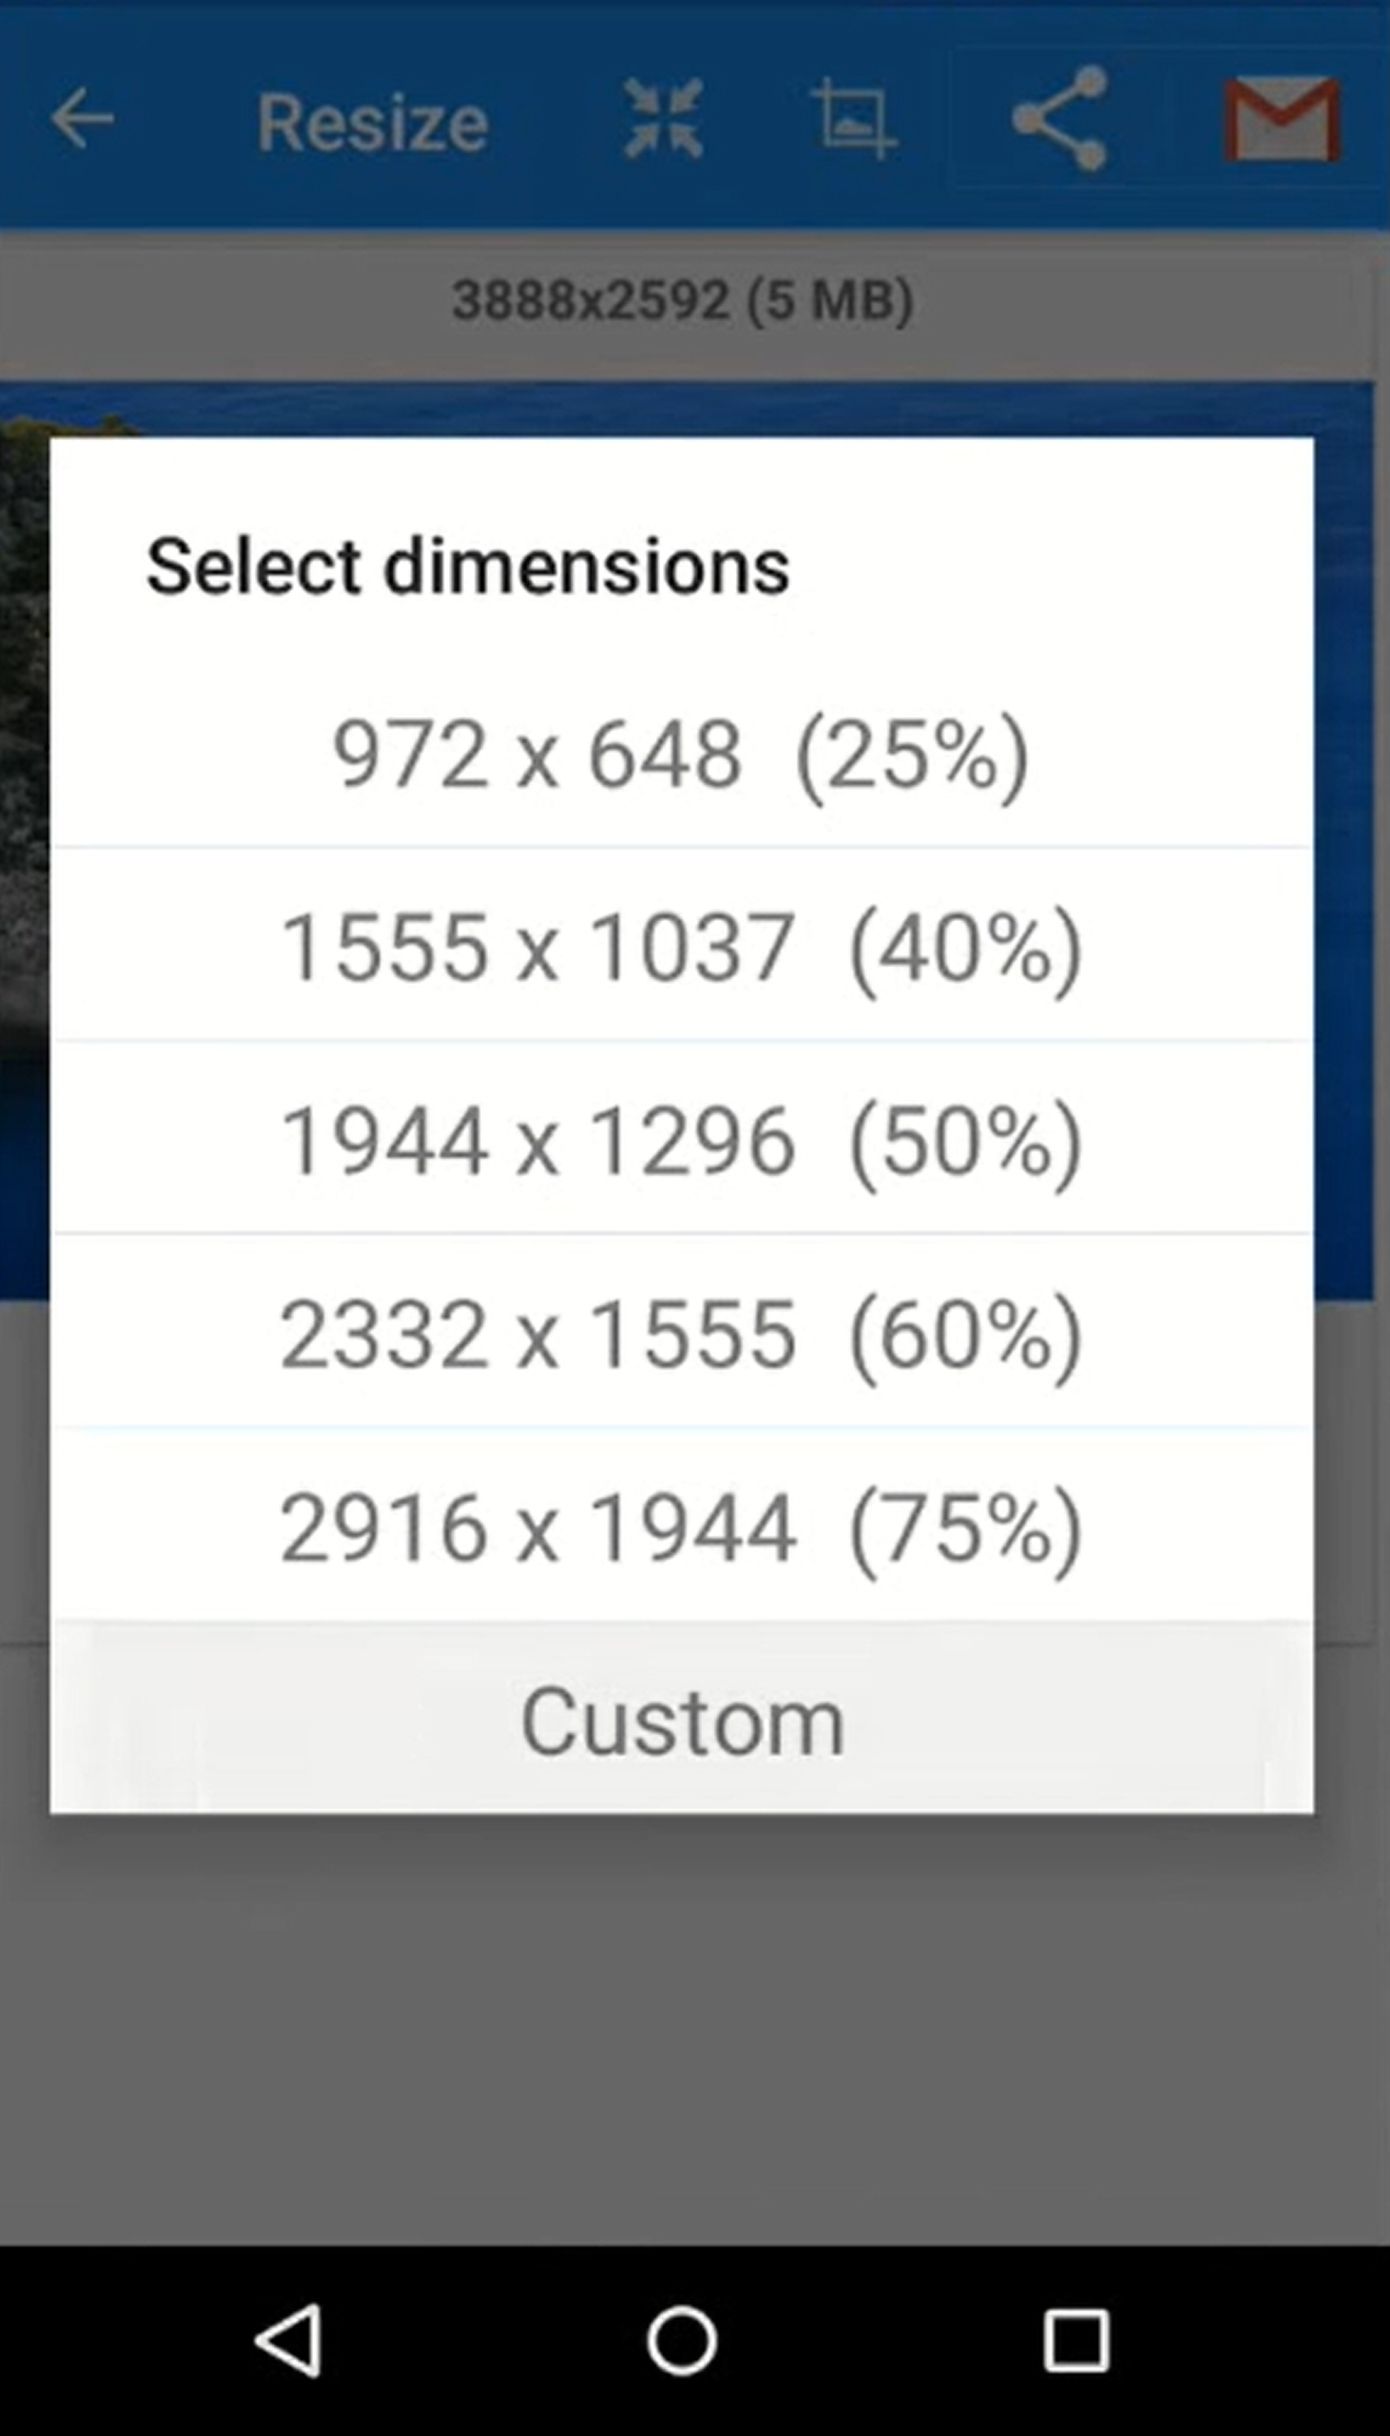 Image Resize Options on Andriod